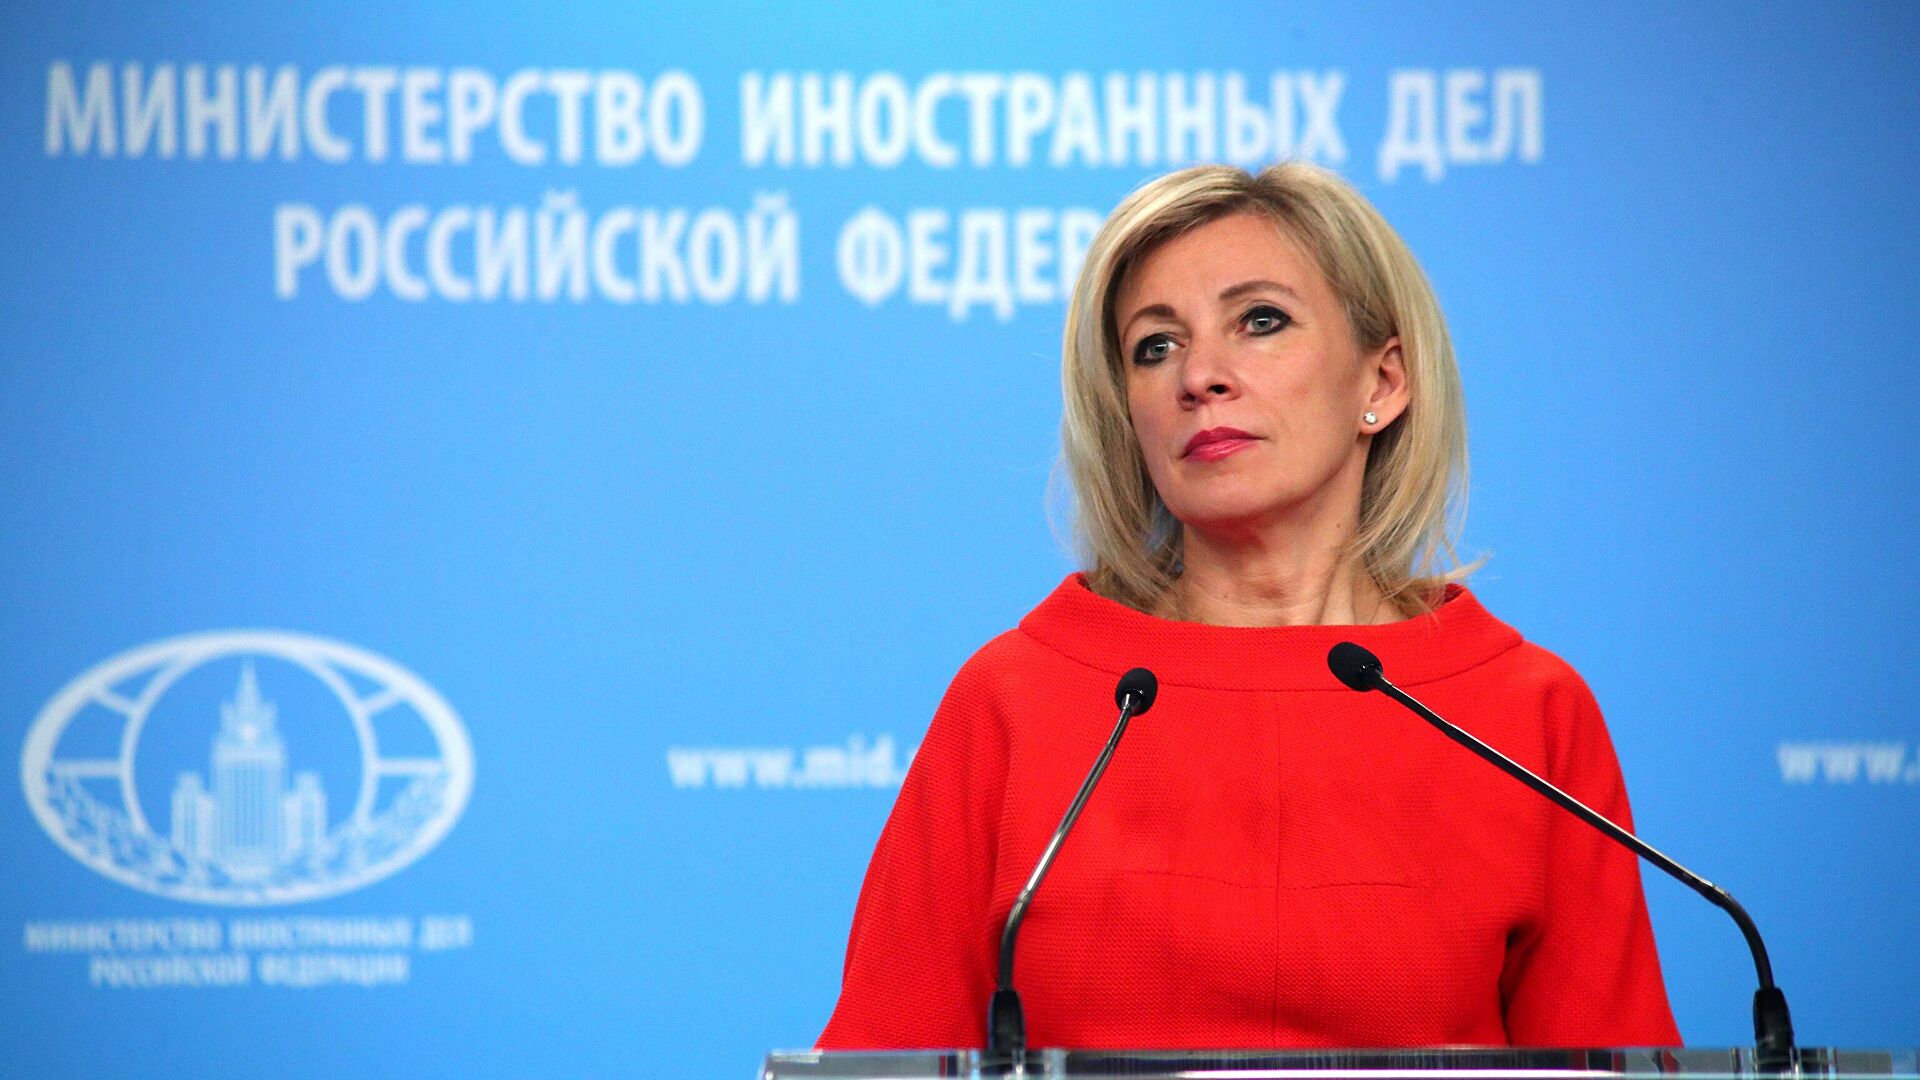 Unblocking of all transport and economic ties in South Caucasus is one of the most important in context of Armenian-Azerbaijani settlement: Zakharova